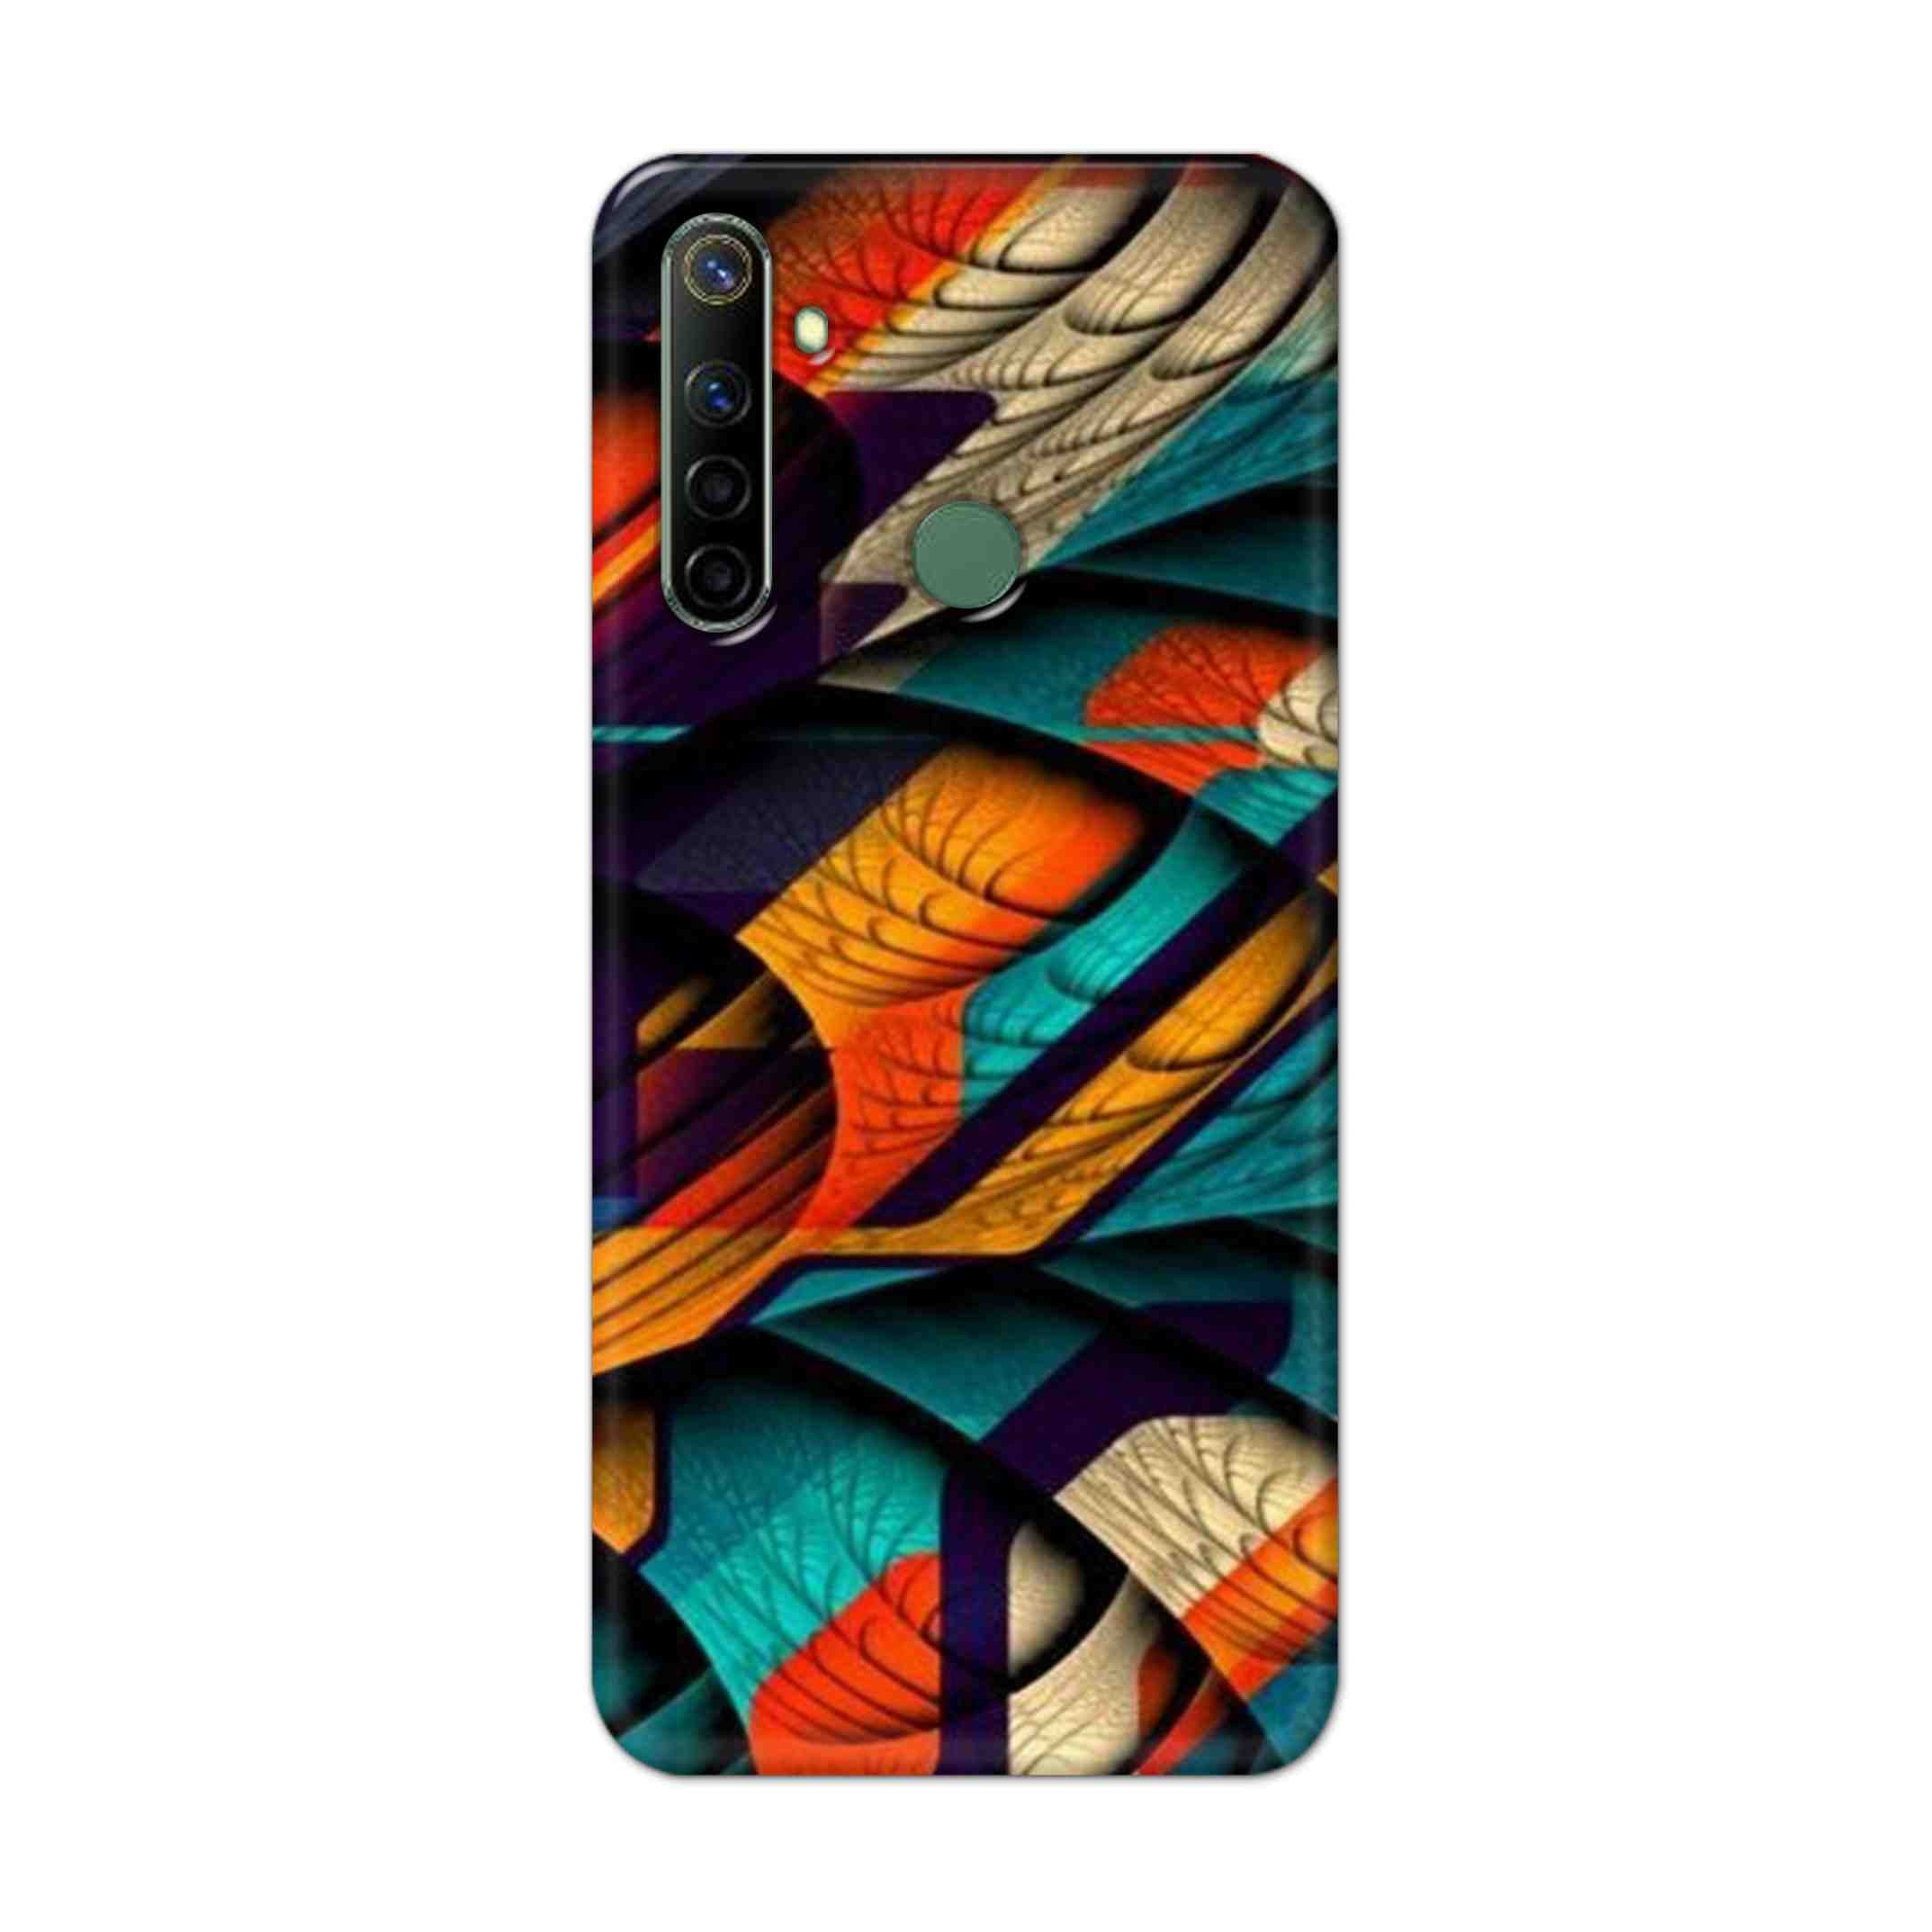 Buy Colour Abstract Hard Back Mobile Phone Case Cover For Realme Narzo 10a Online